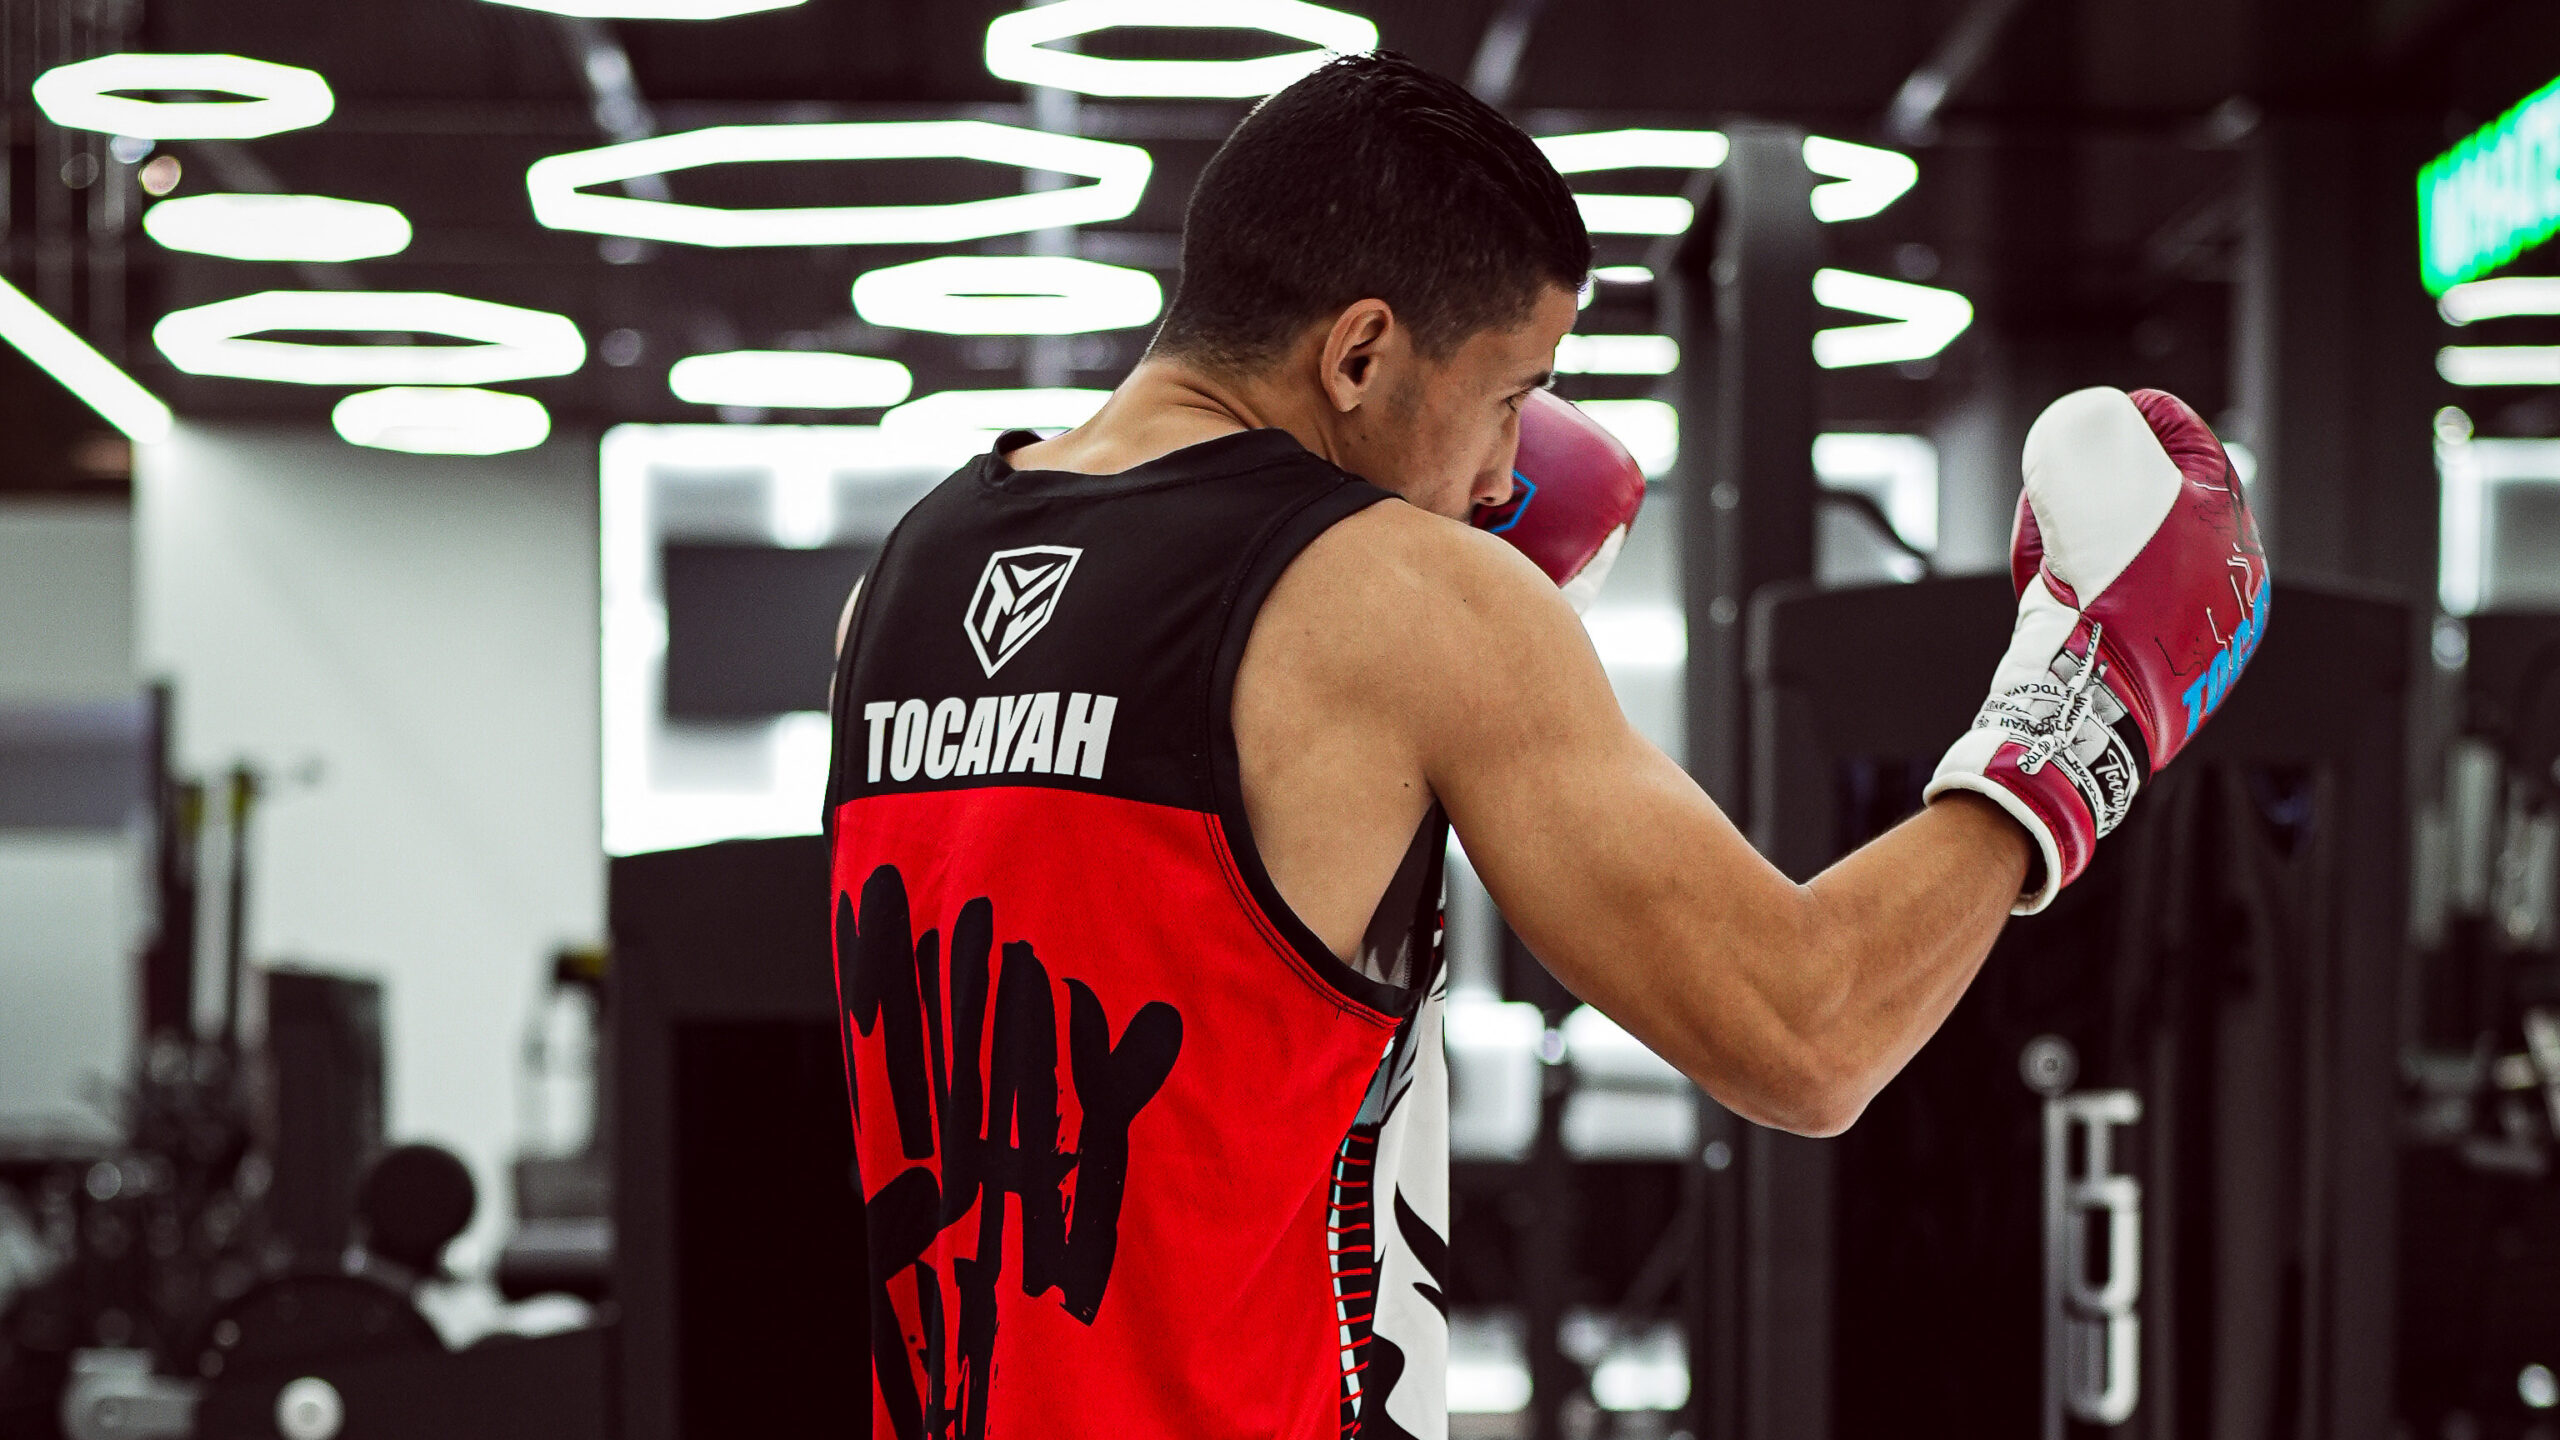 6 Tips for superior training – Master shadowboxing